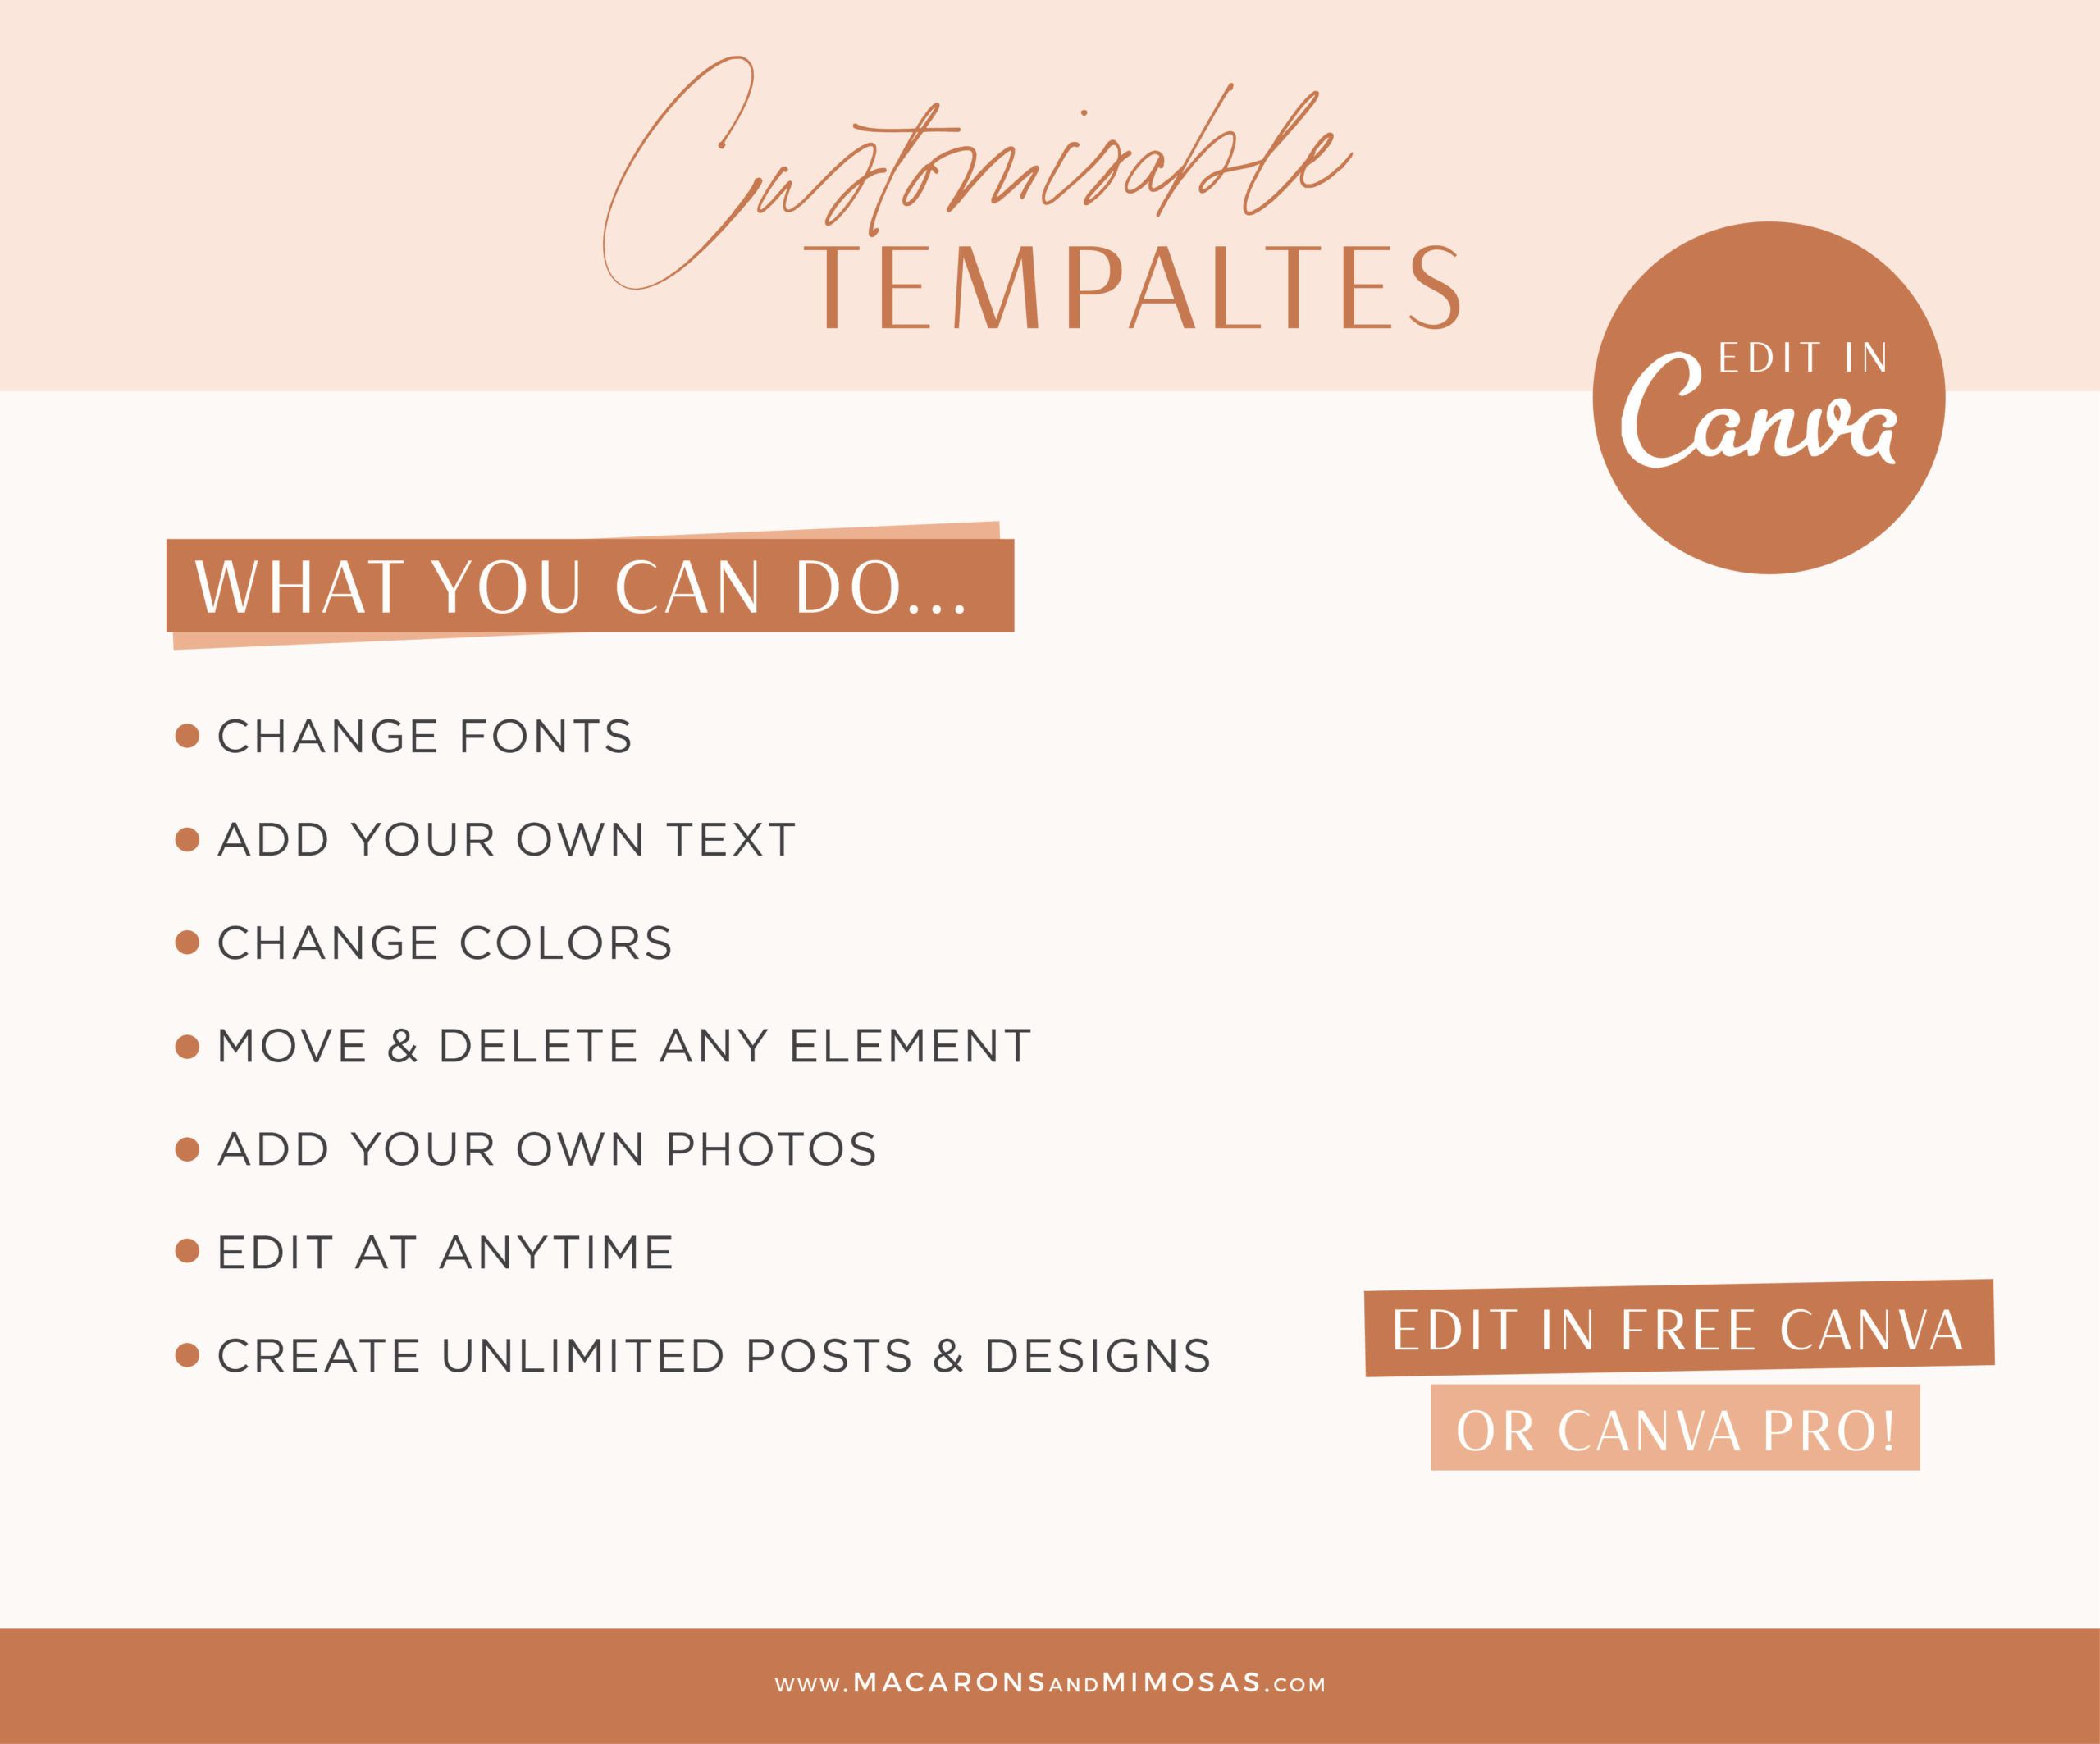 Neutral Boho Instagram Post Templates Canva, Pink Quotes for Instagram, Creative Instagram Templates, Colorful Canva Designs, Small Business Brand